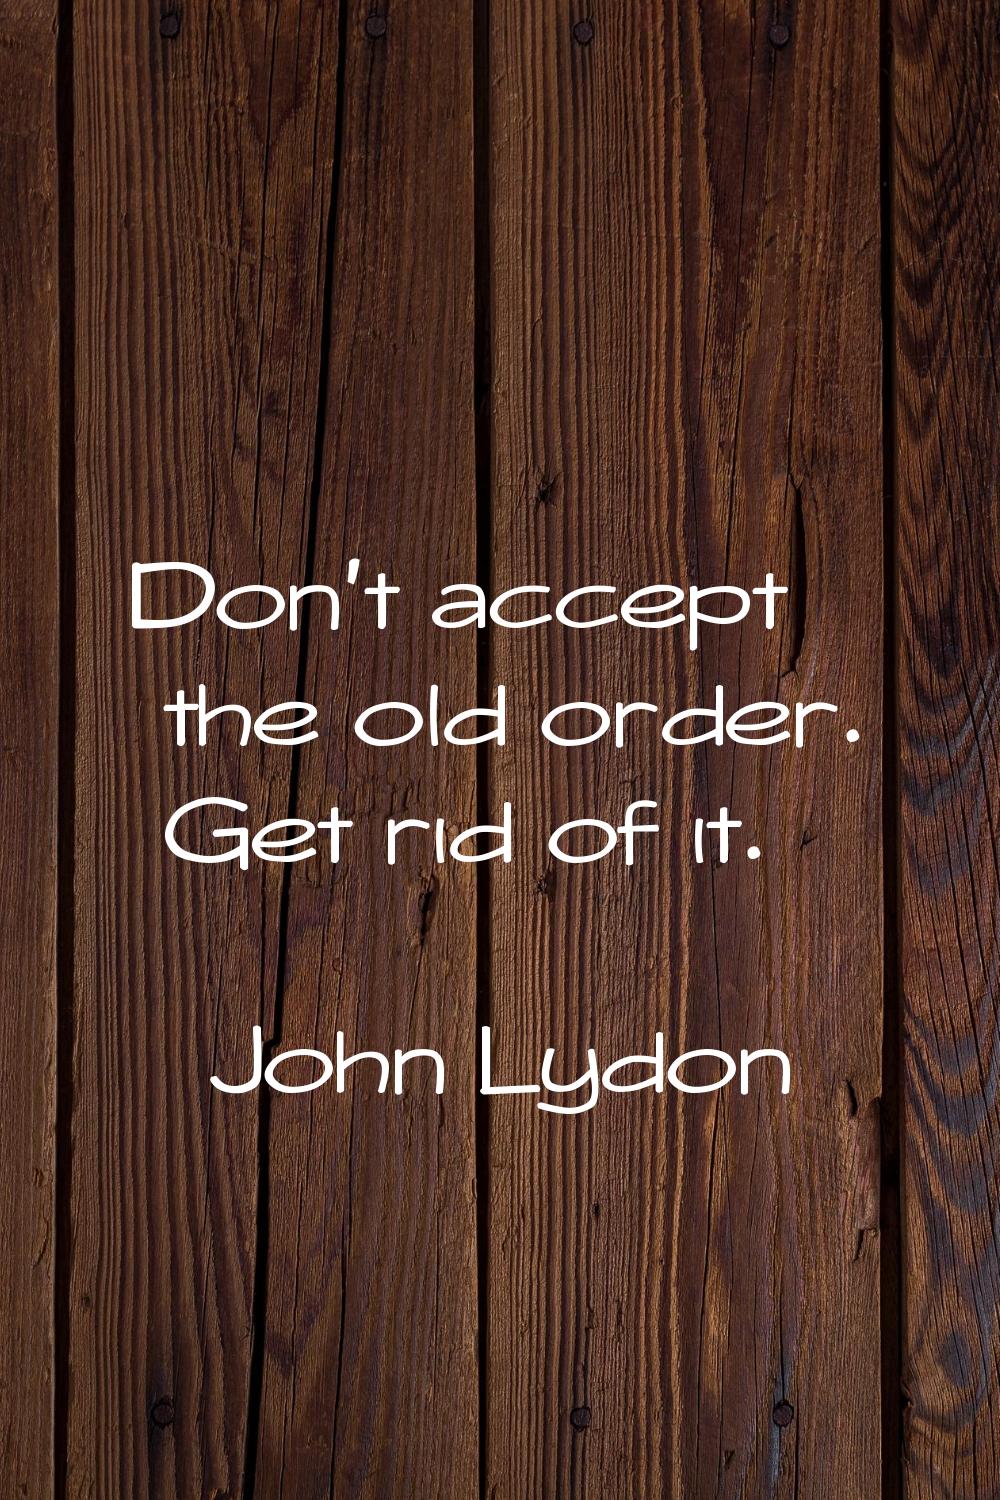 Don't accept the old order. Get rid of it.